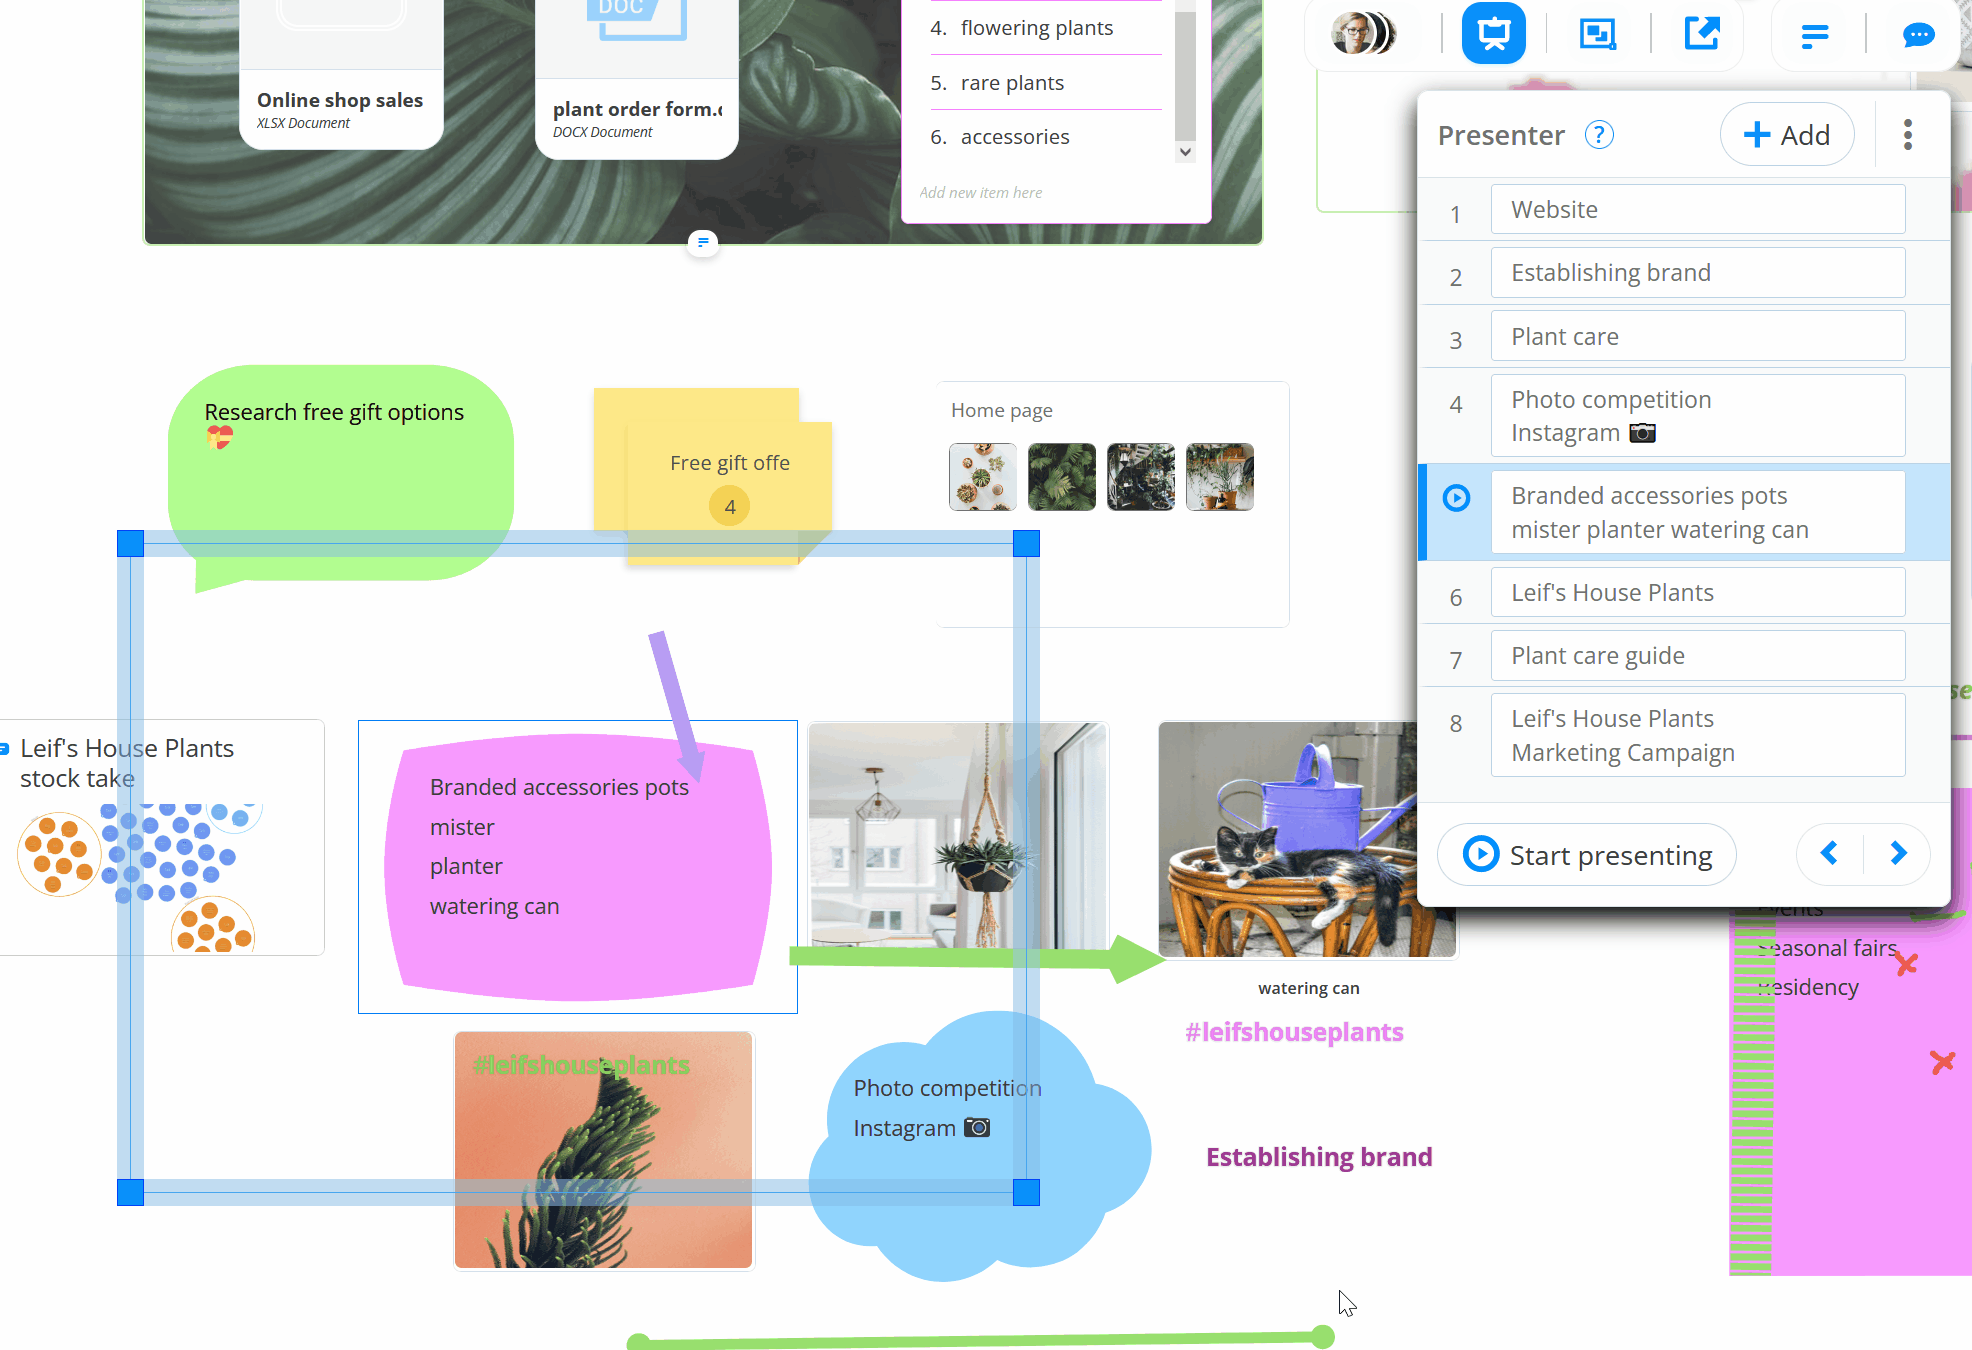 You can adjust how zoomed in or out a slide is